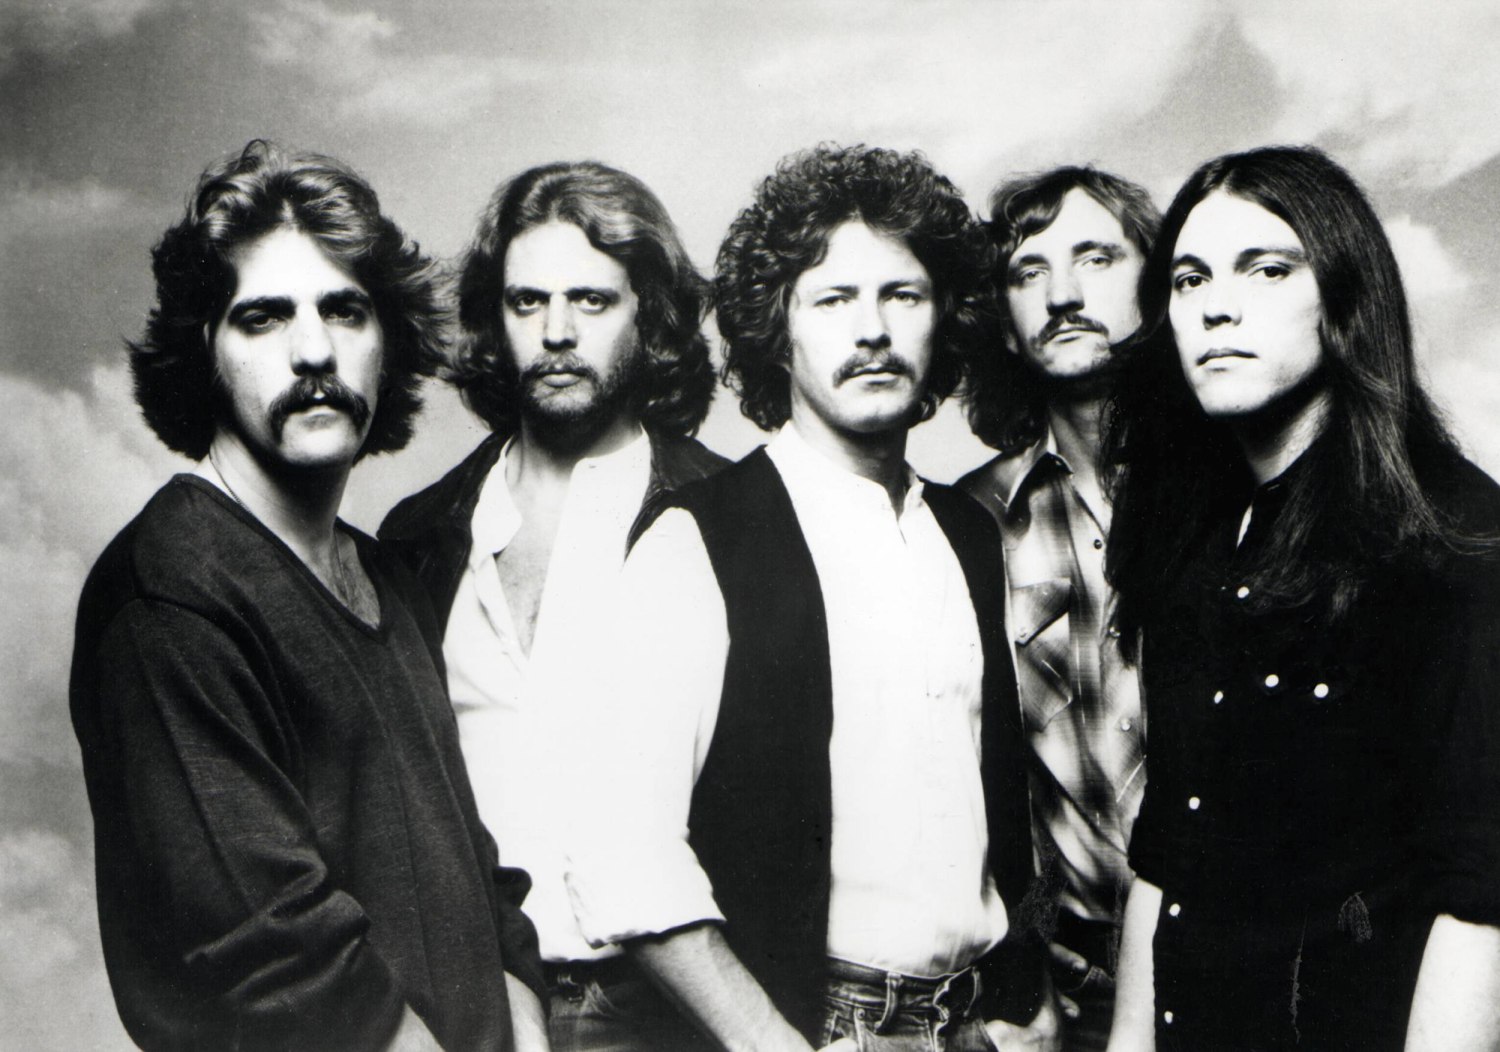 Beating Michael Jackson, the Eagles have No.1 album of all-time